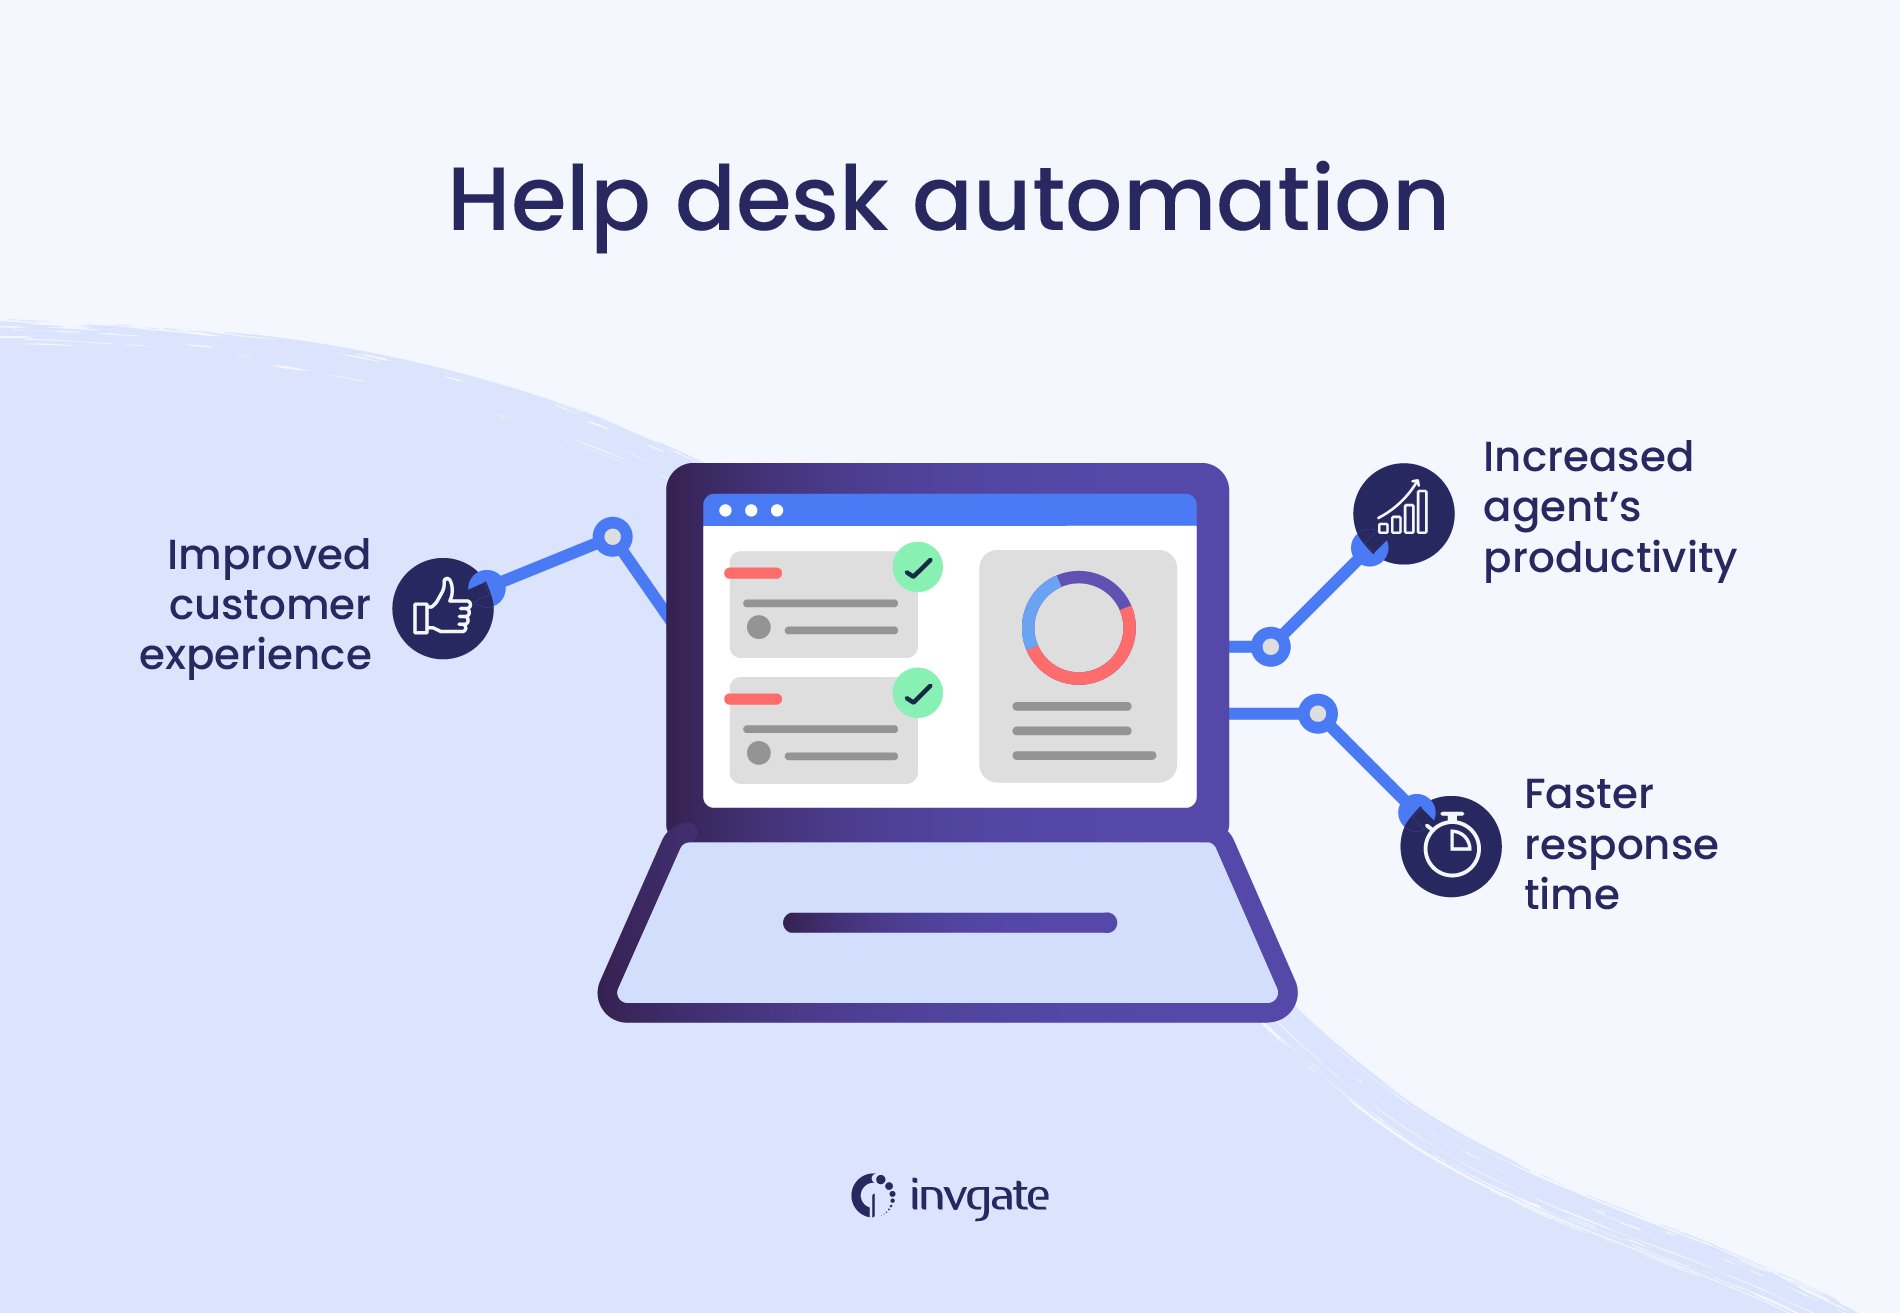 3 ways in which workflow automation improves the help desk ticketing process flow.